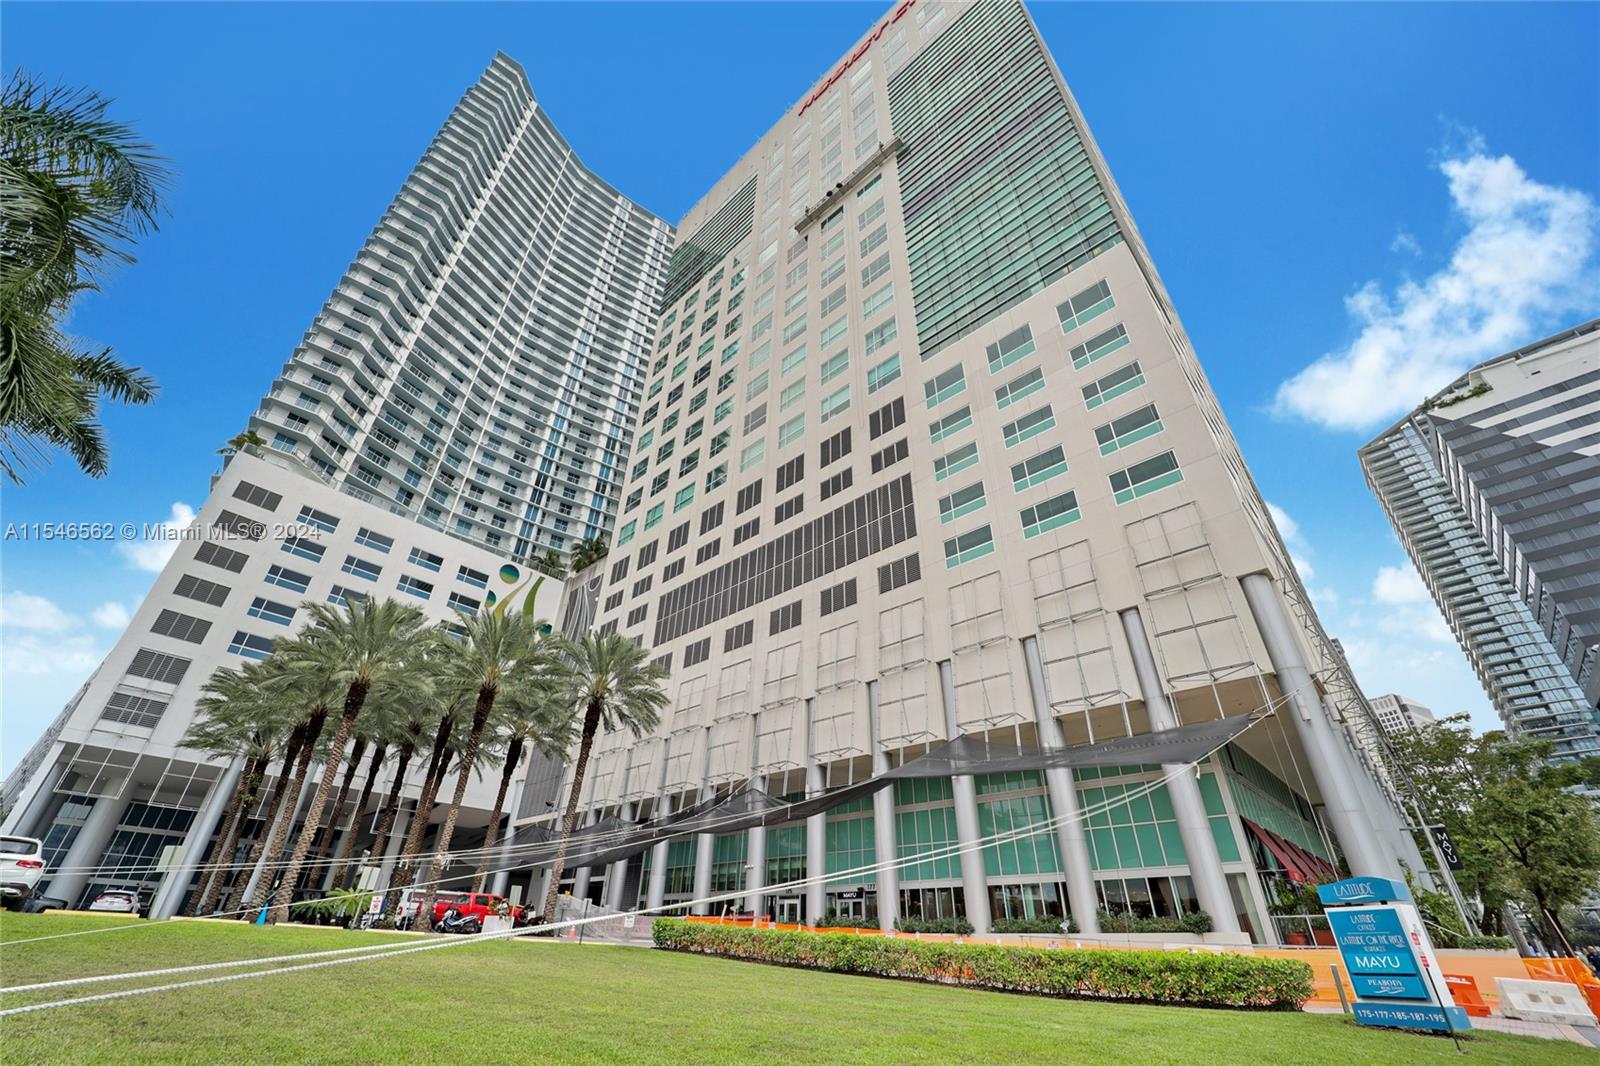 CLASS A OFFICE BUILDING WITH RECEPTION AND 4 OFFICE SPACES,  SPACIOUS OFFICE WITH 1836 SF AT
LATITUDE ONE, COMPLETE WITH GLASS PARTITIONS, CONFERENCE ROOM AREA, RECEPTION, AND
ATTENDED LOBBY. INCLUDES 3 ASSIGNED PARKING SPACES WALKING DISTANCE TO BRICKELL CITY CENTRE.
READY TO MOVE IN.